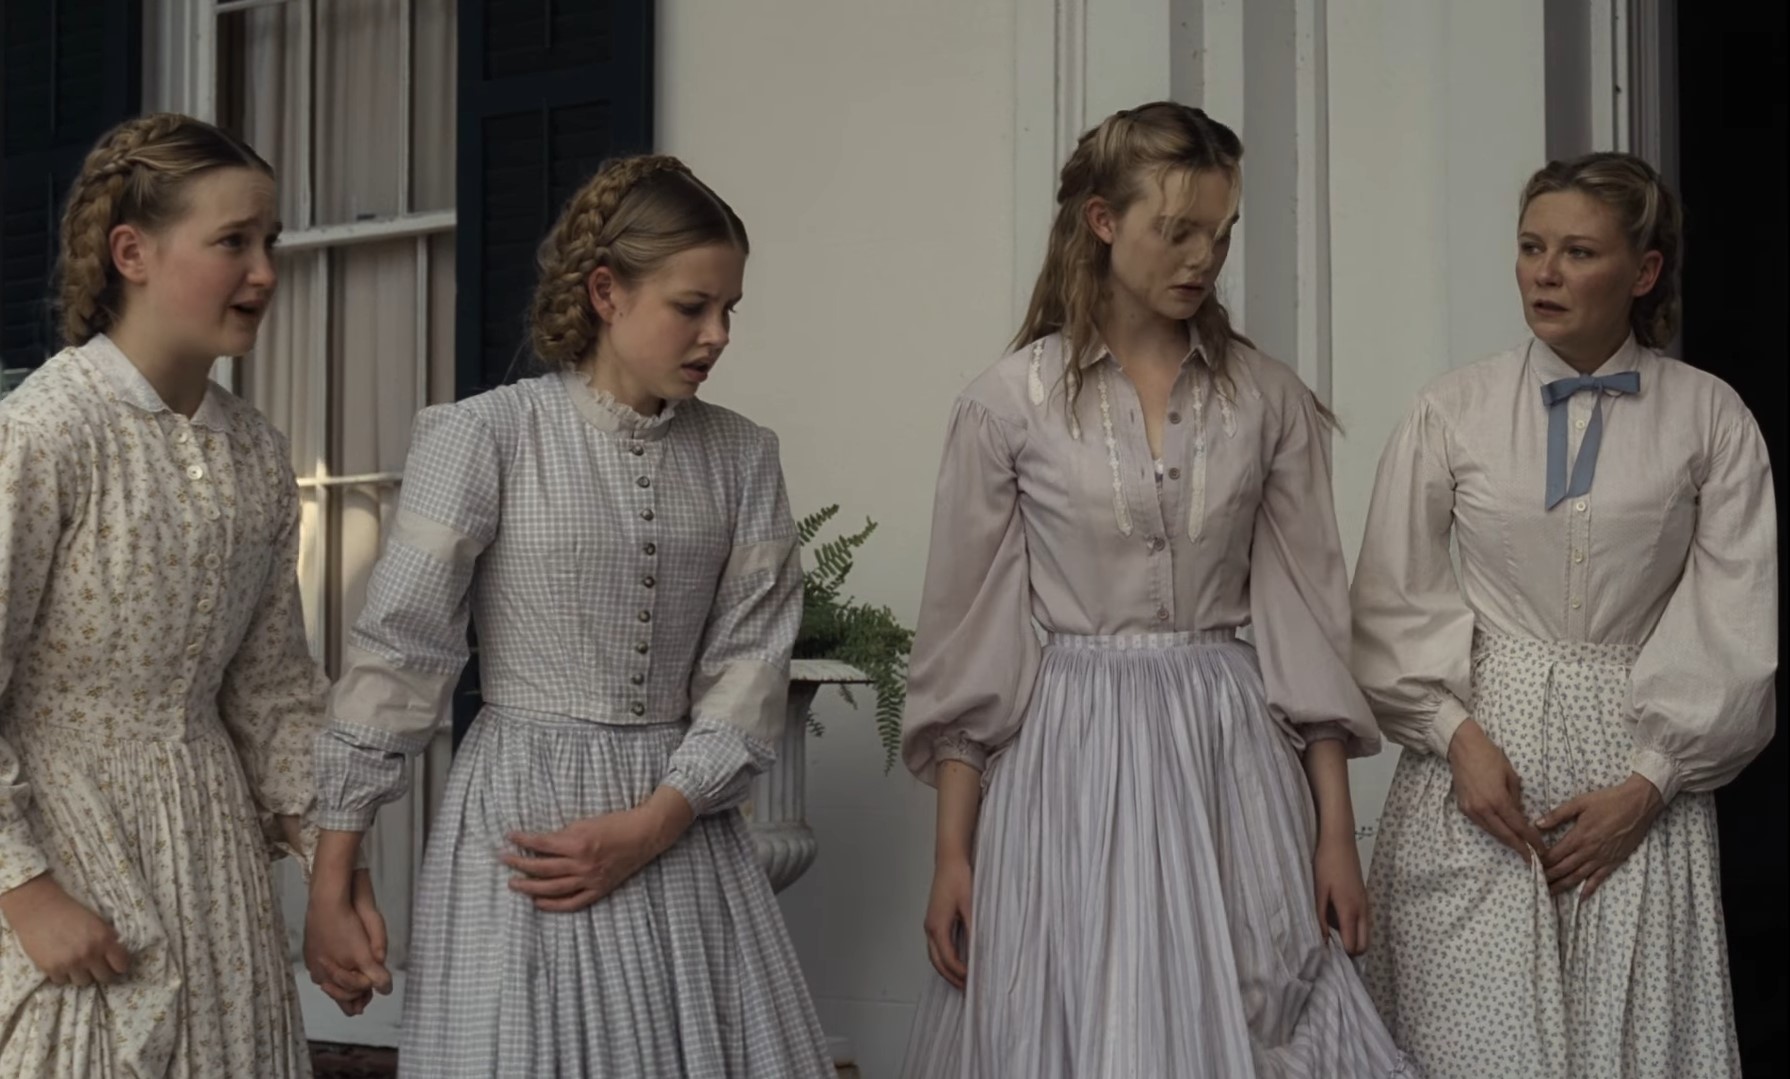 Where Was The Beguiled Filmed?